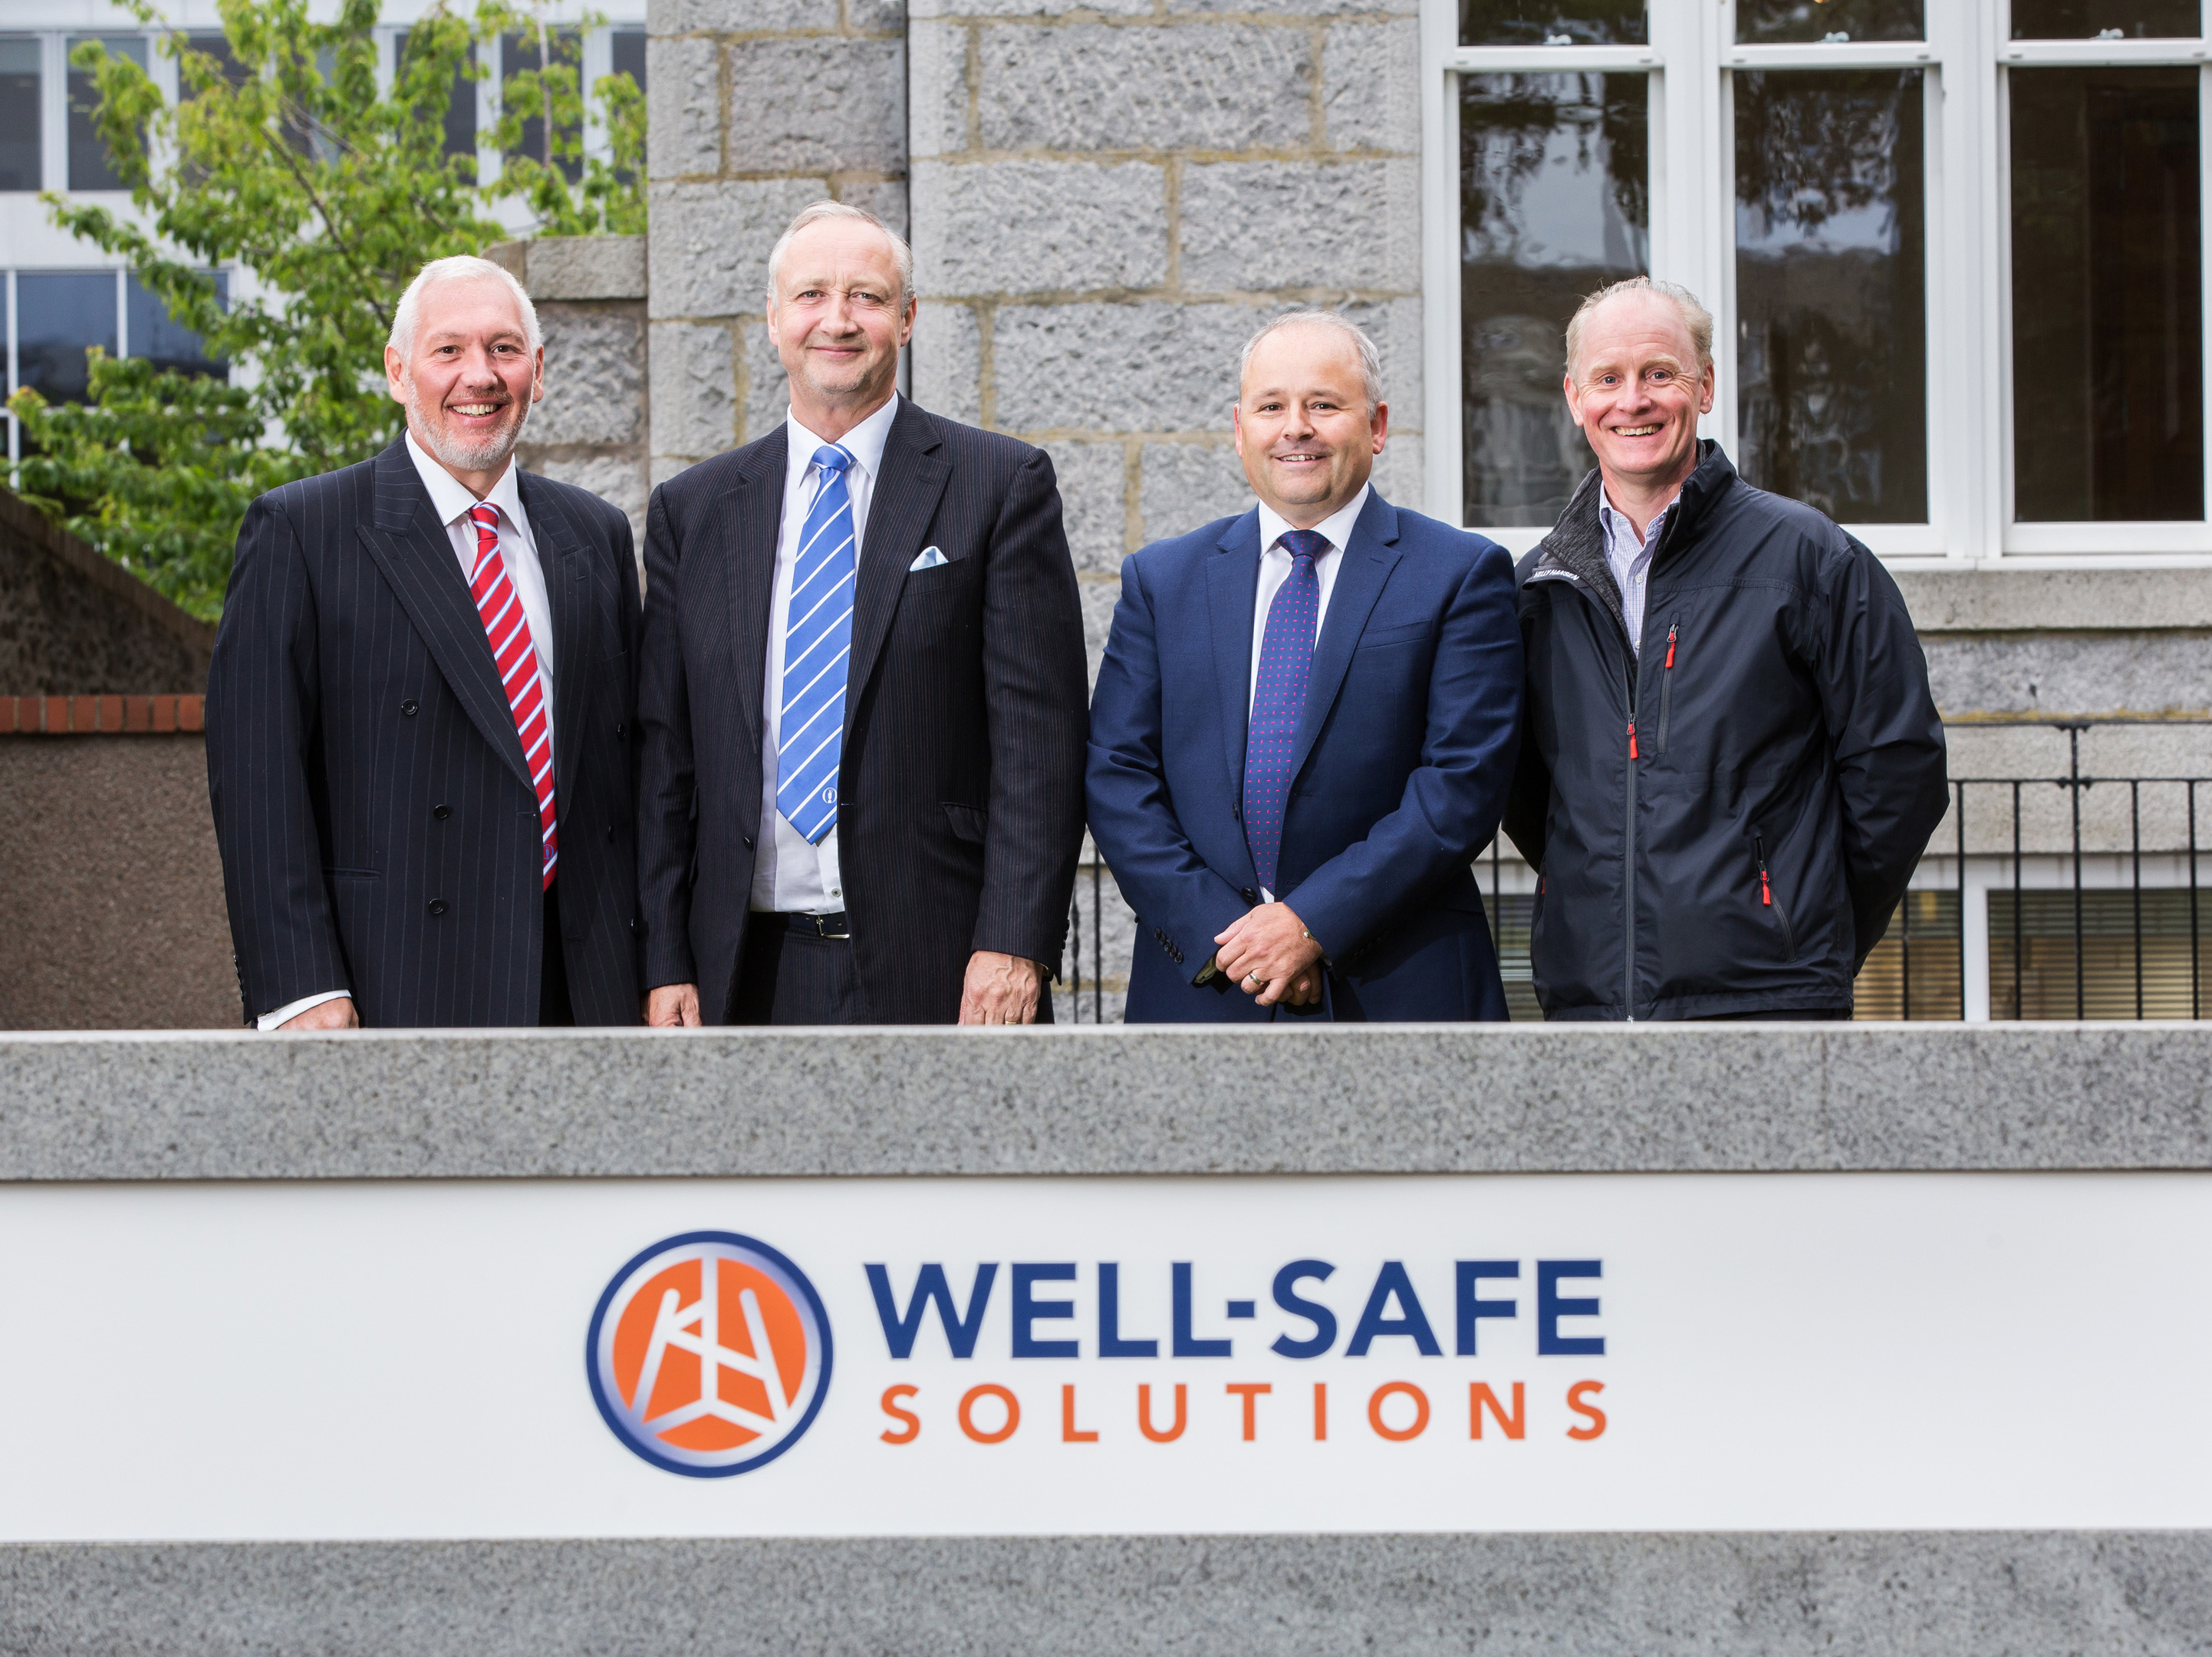 (L to R) Graeme Murray – Legal and commercial director, Mark Patterson – Executive director, Phil Milton - CEO, Glenn Wilson - chief technical officer.